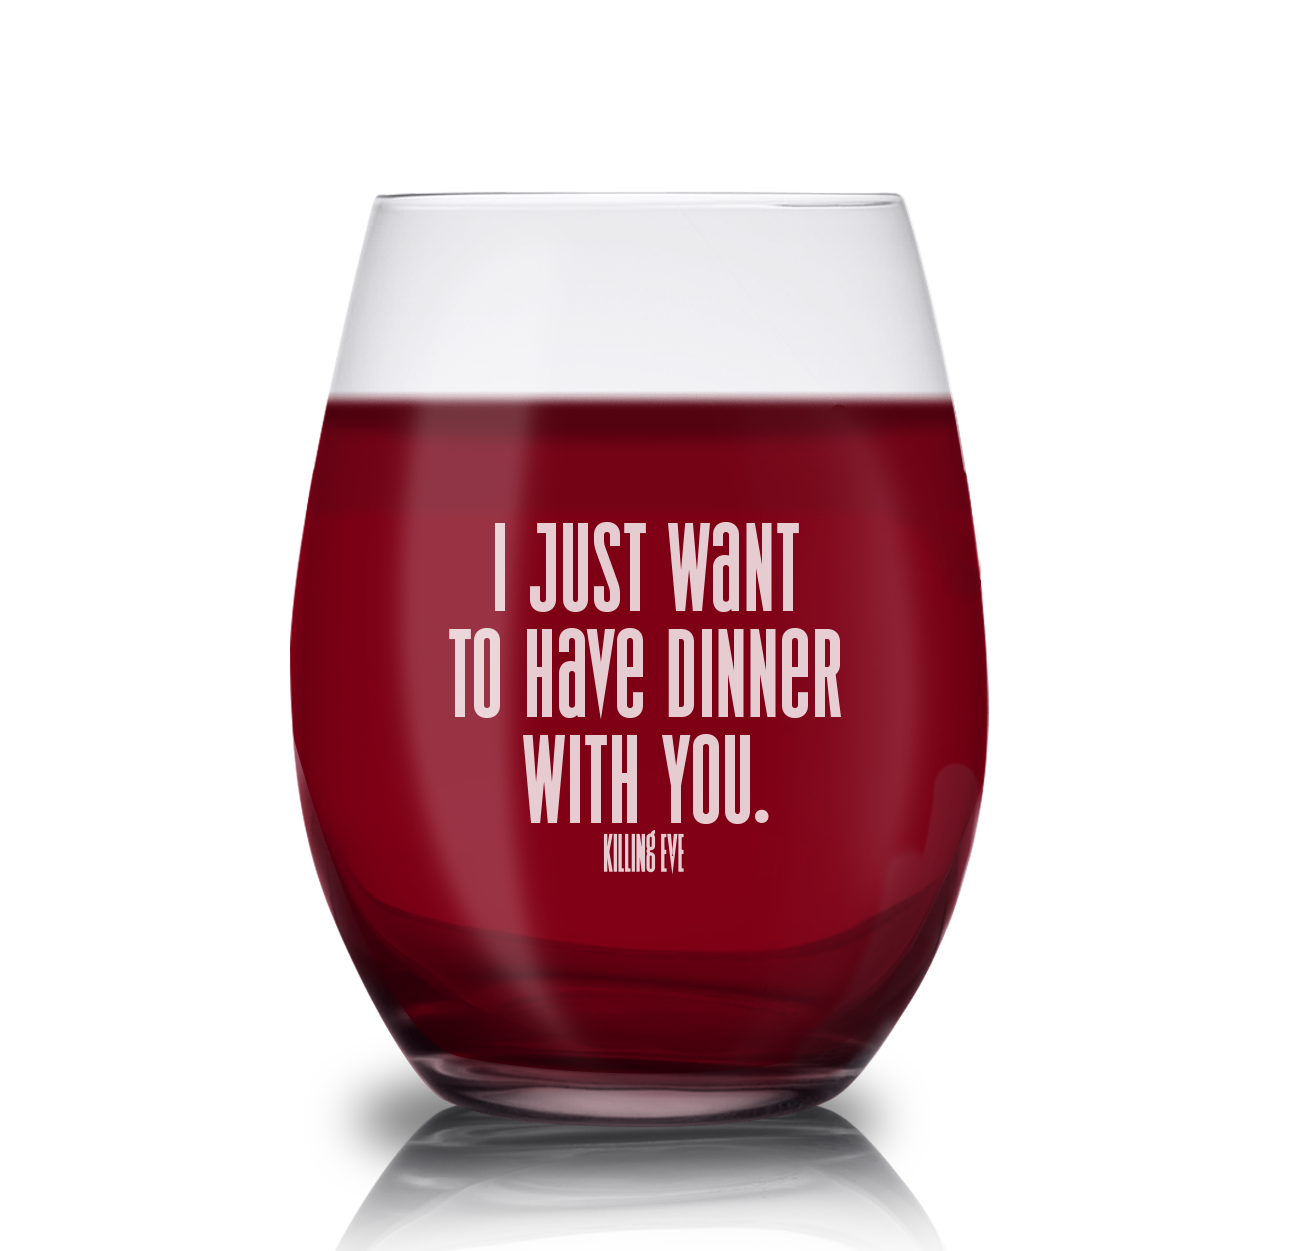 Killing Eve Dinner With You Laser Engraved Stemless Wine Glass